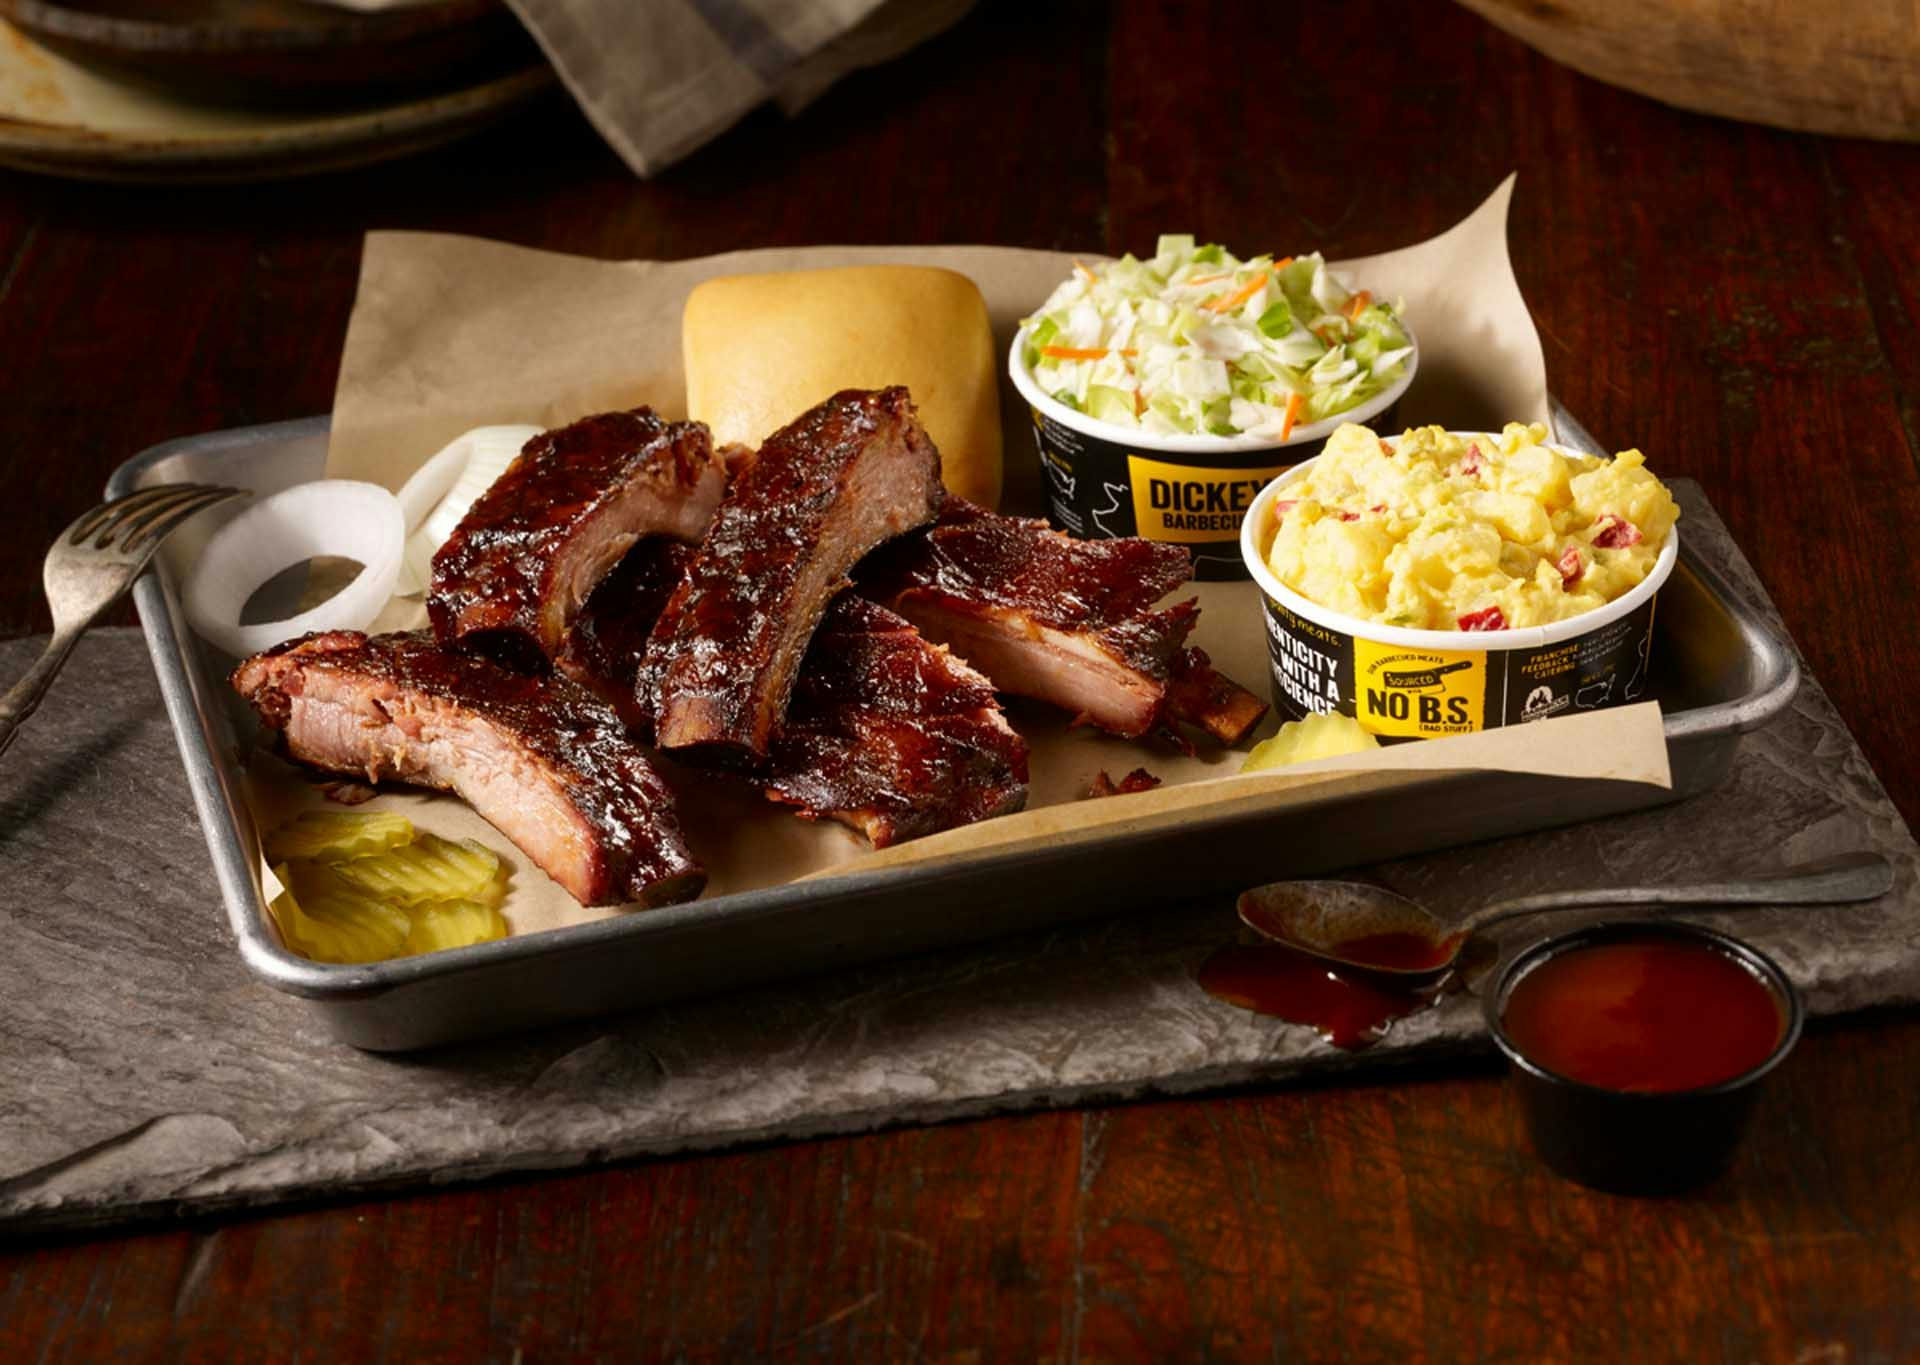 Volume One:Dickey’s Barbecue Pit Features Southern BBQ